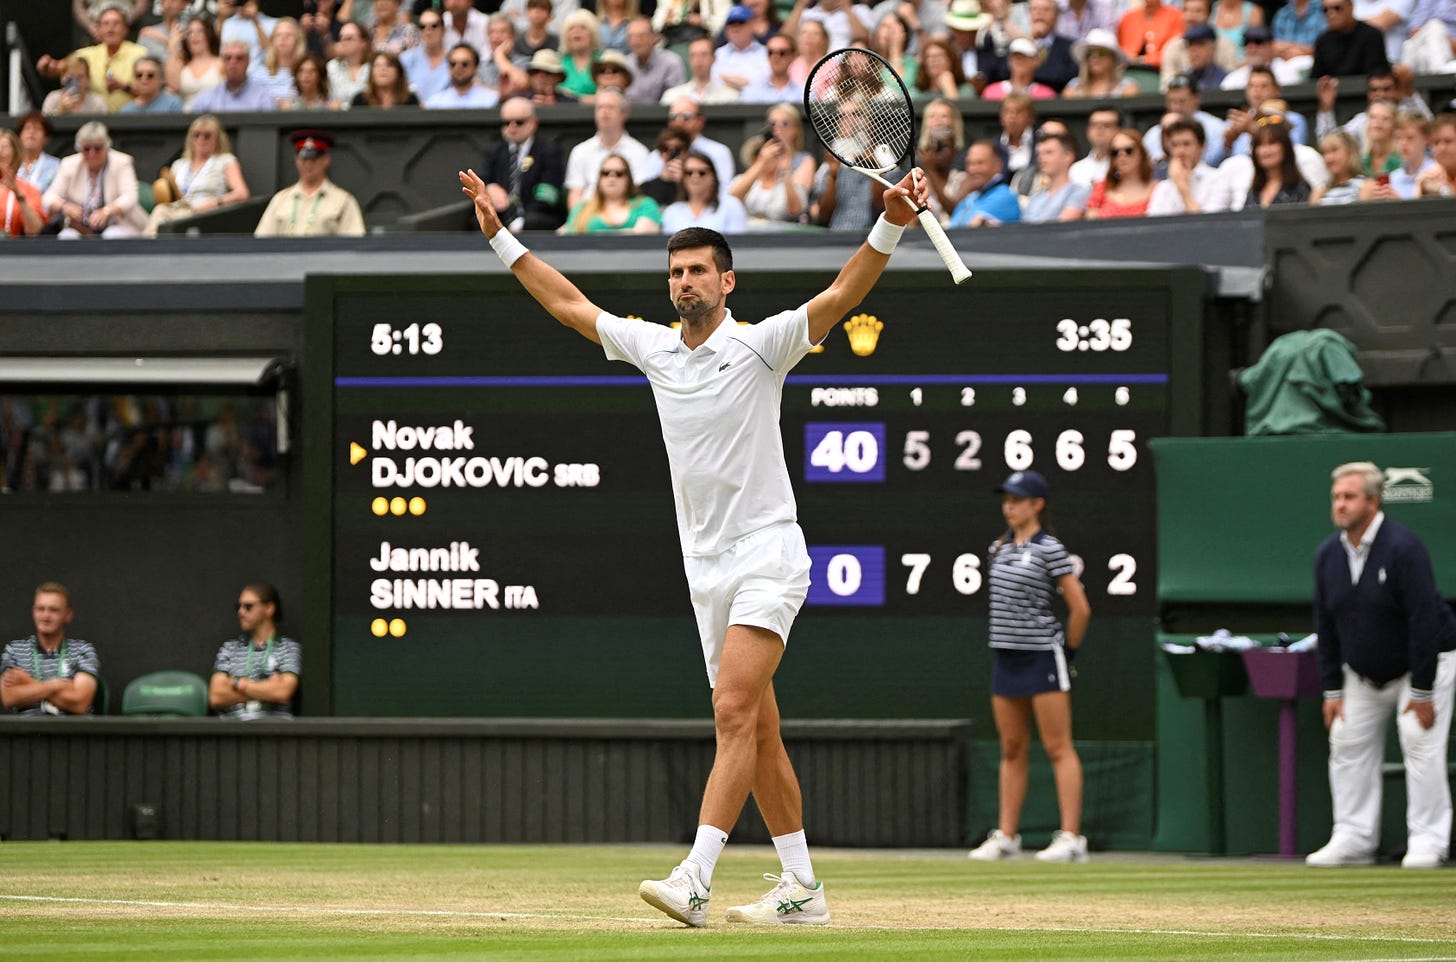 Friendly word in the mirror inspired comeback, says Djokovic | Reuters